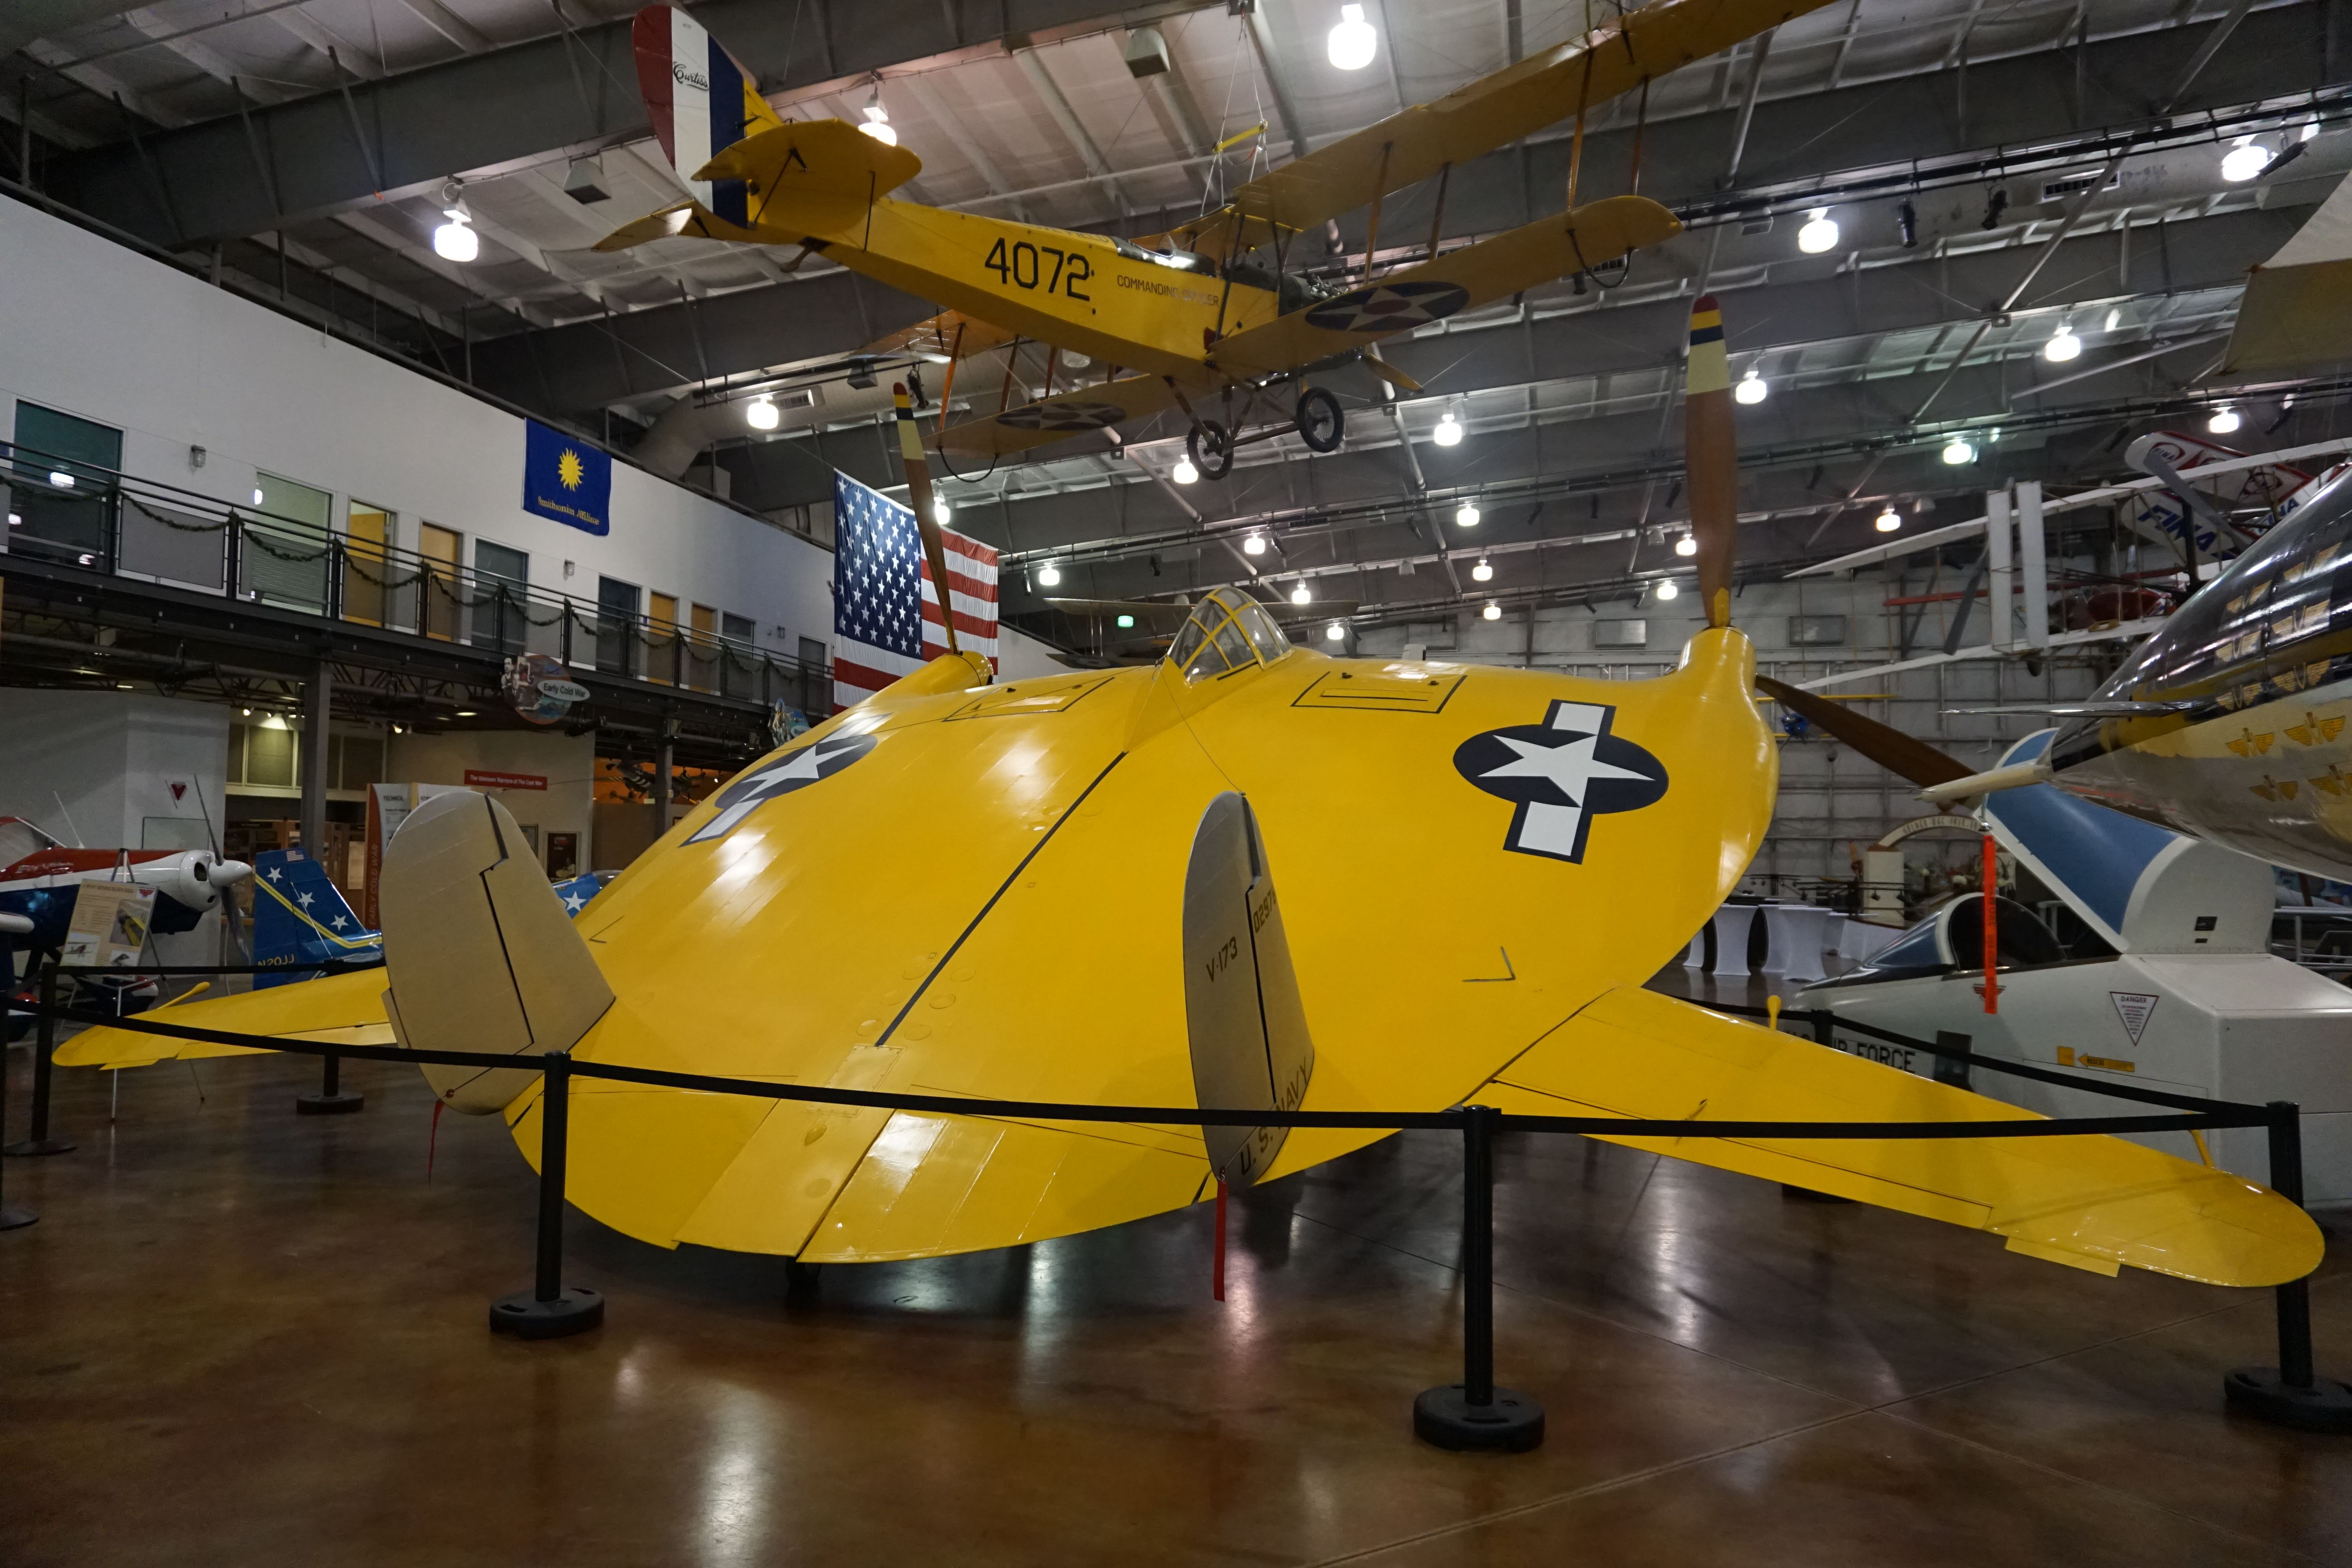 A Vought V-173 Flying Pancake on display in a museum.